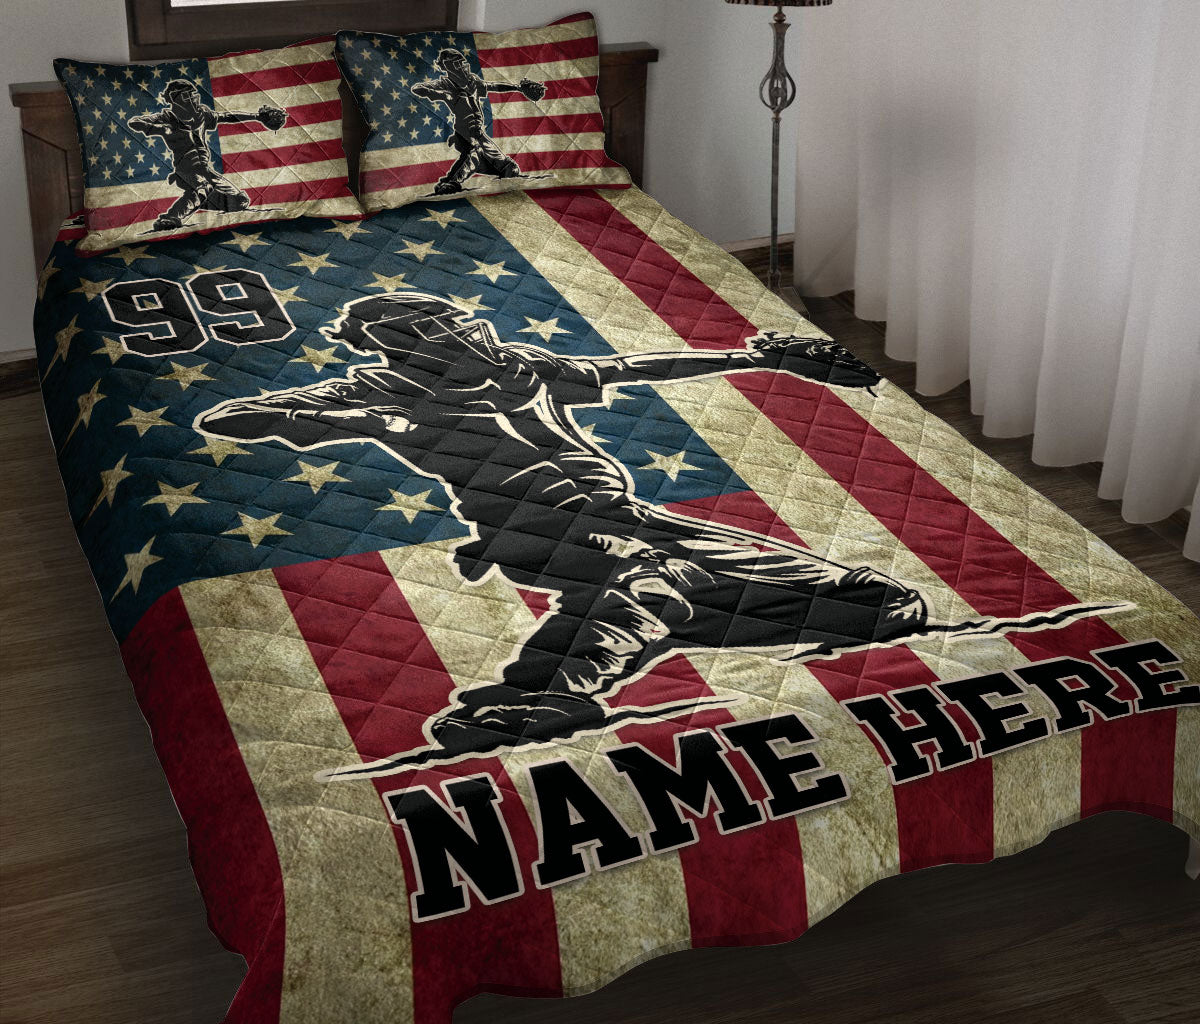 Ohaprints-Quilt-Bed-Set-Pillowcase-Baseball-Player-Catcher-American-Flag-Vintage-Custom-Personalized-Name-Blanket-Bedspread-Bedding-3183-Throw (55'' x 60'')